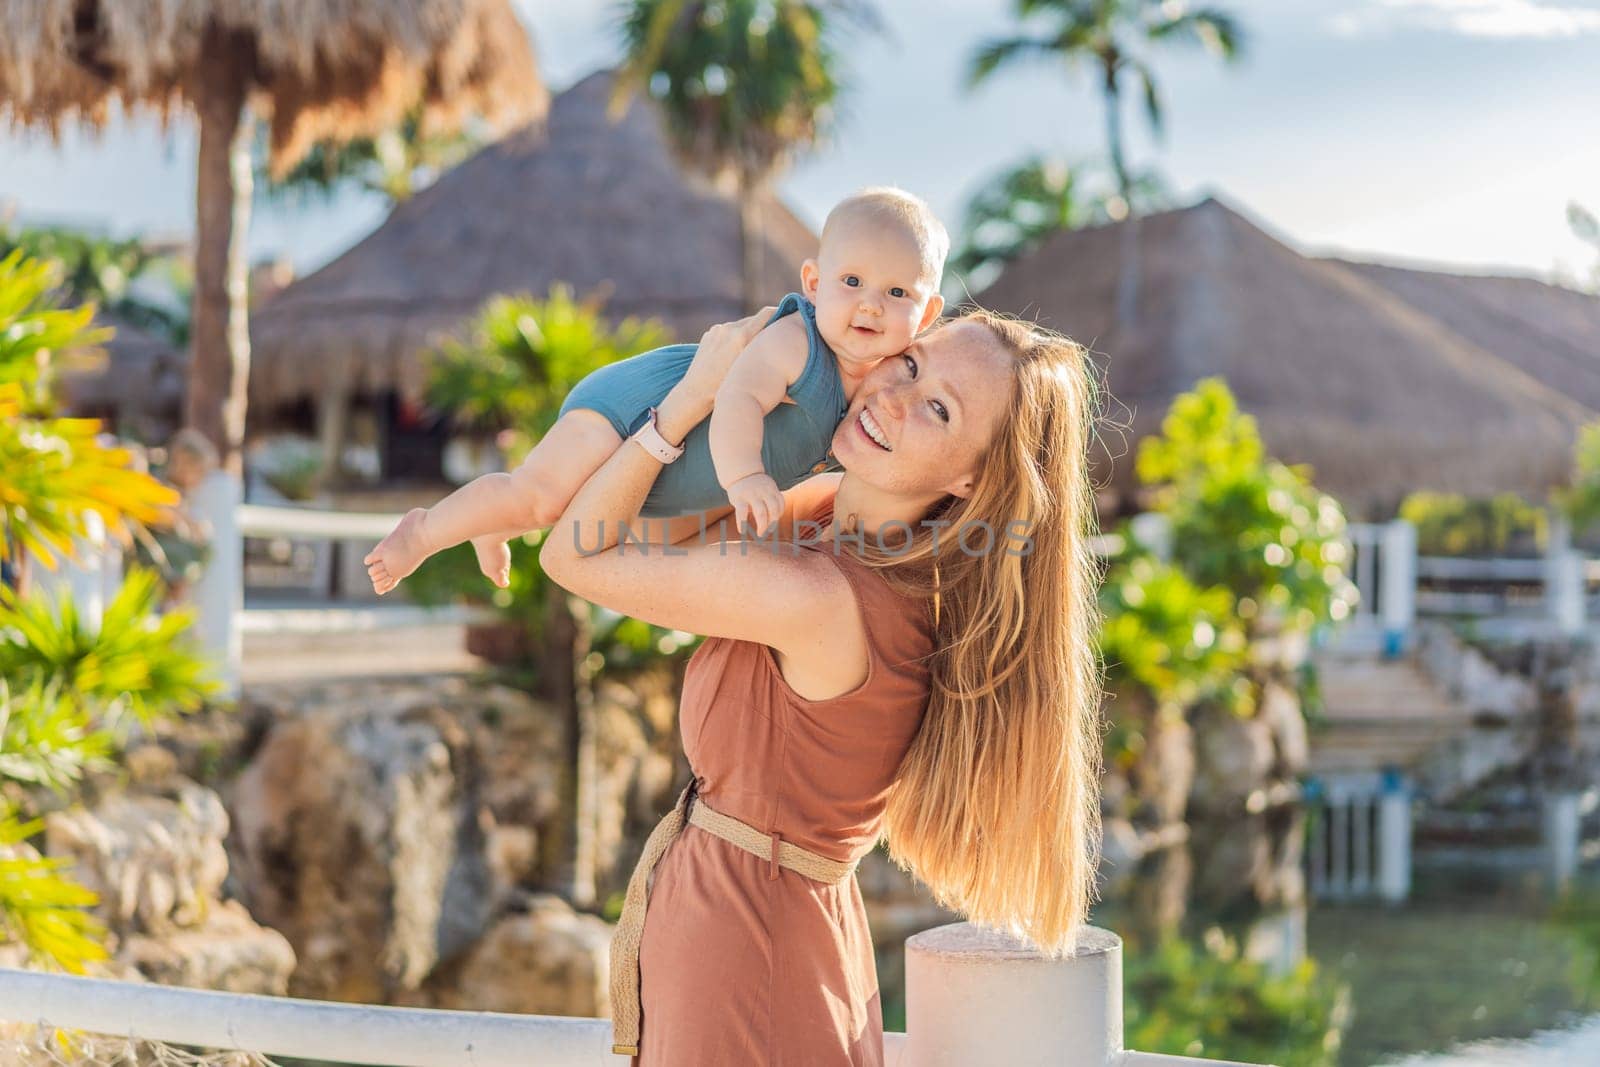 Amidst tropical palms and thatched roofs, a loving mom embraces her baby, sharing warmth and affection in a tranquil outdoor setting by galitskaya